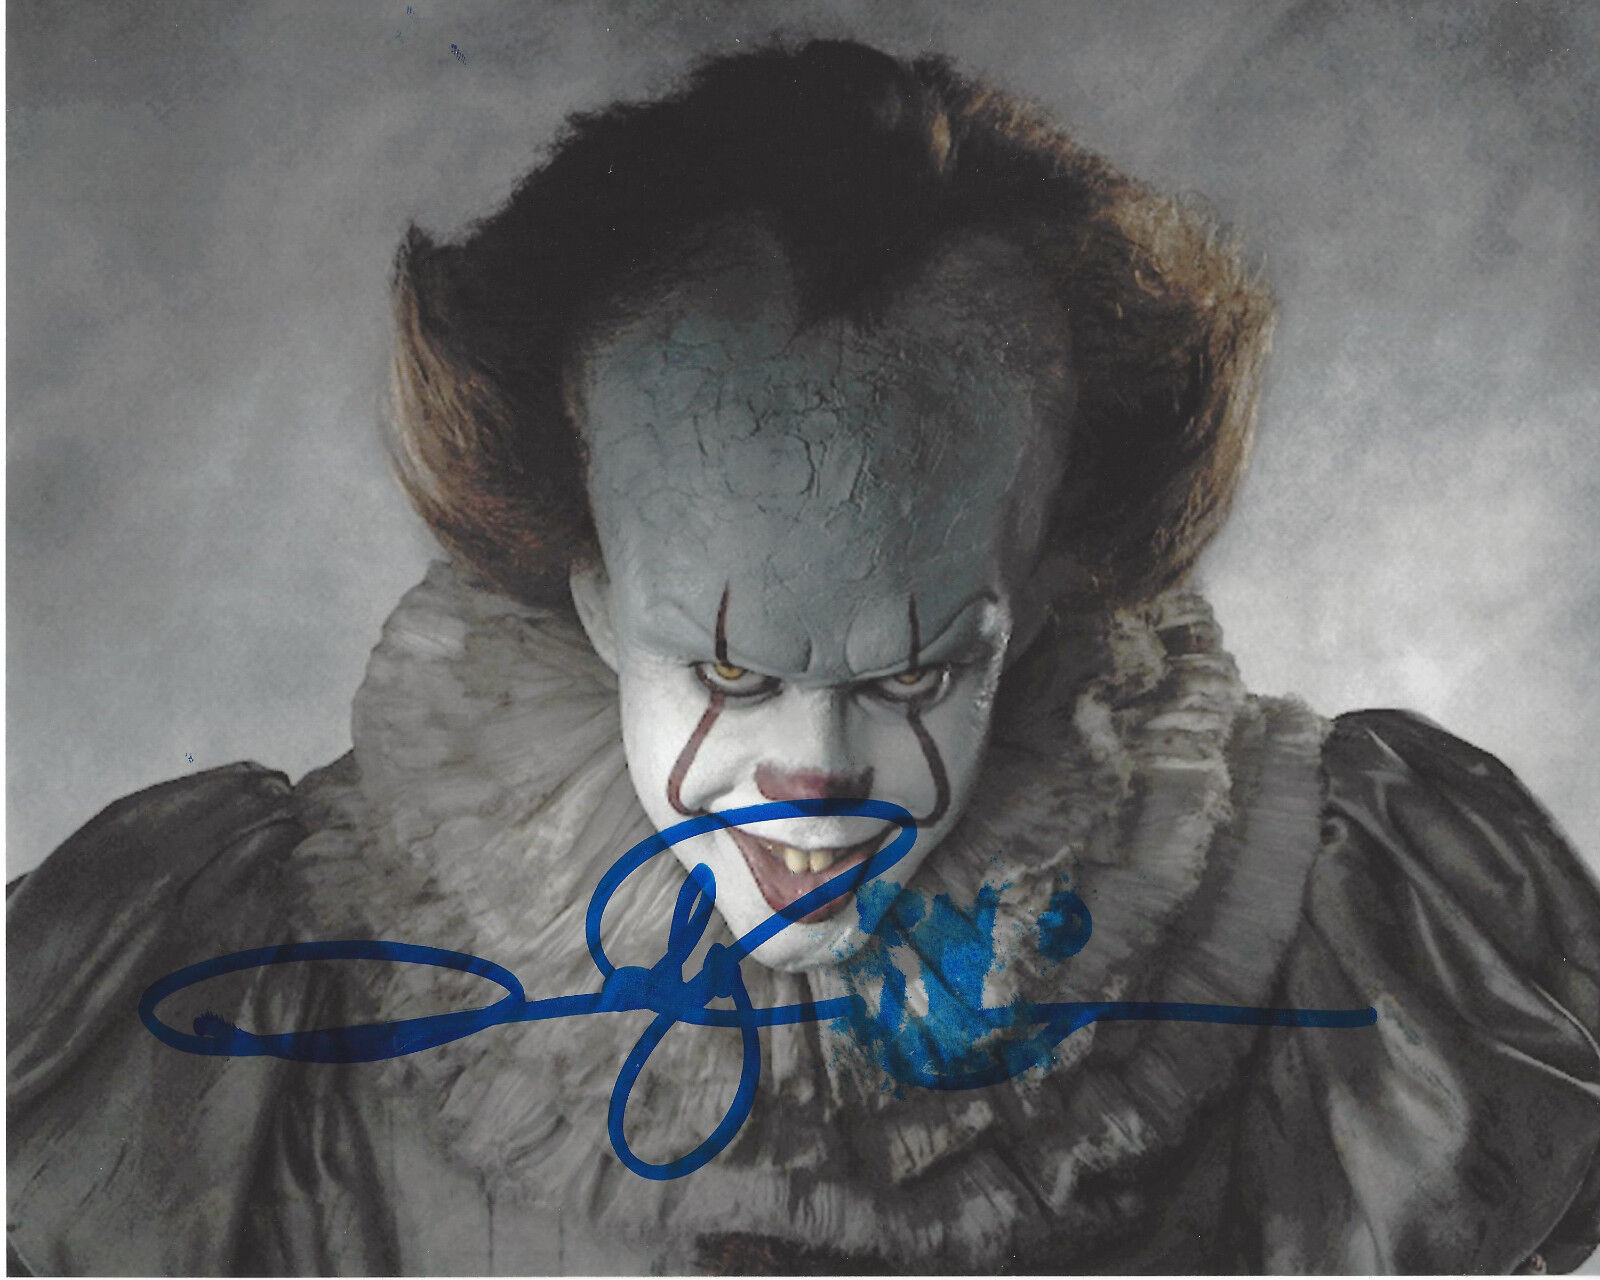 DIRECTOR ANDY MUSCHIETTI SIGNED AUTHENTIC IT 'PENNYWISE' 8X10 Photo Poster painting w/COA PROOF